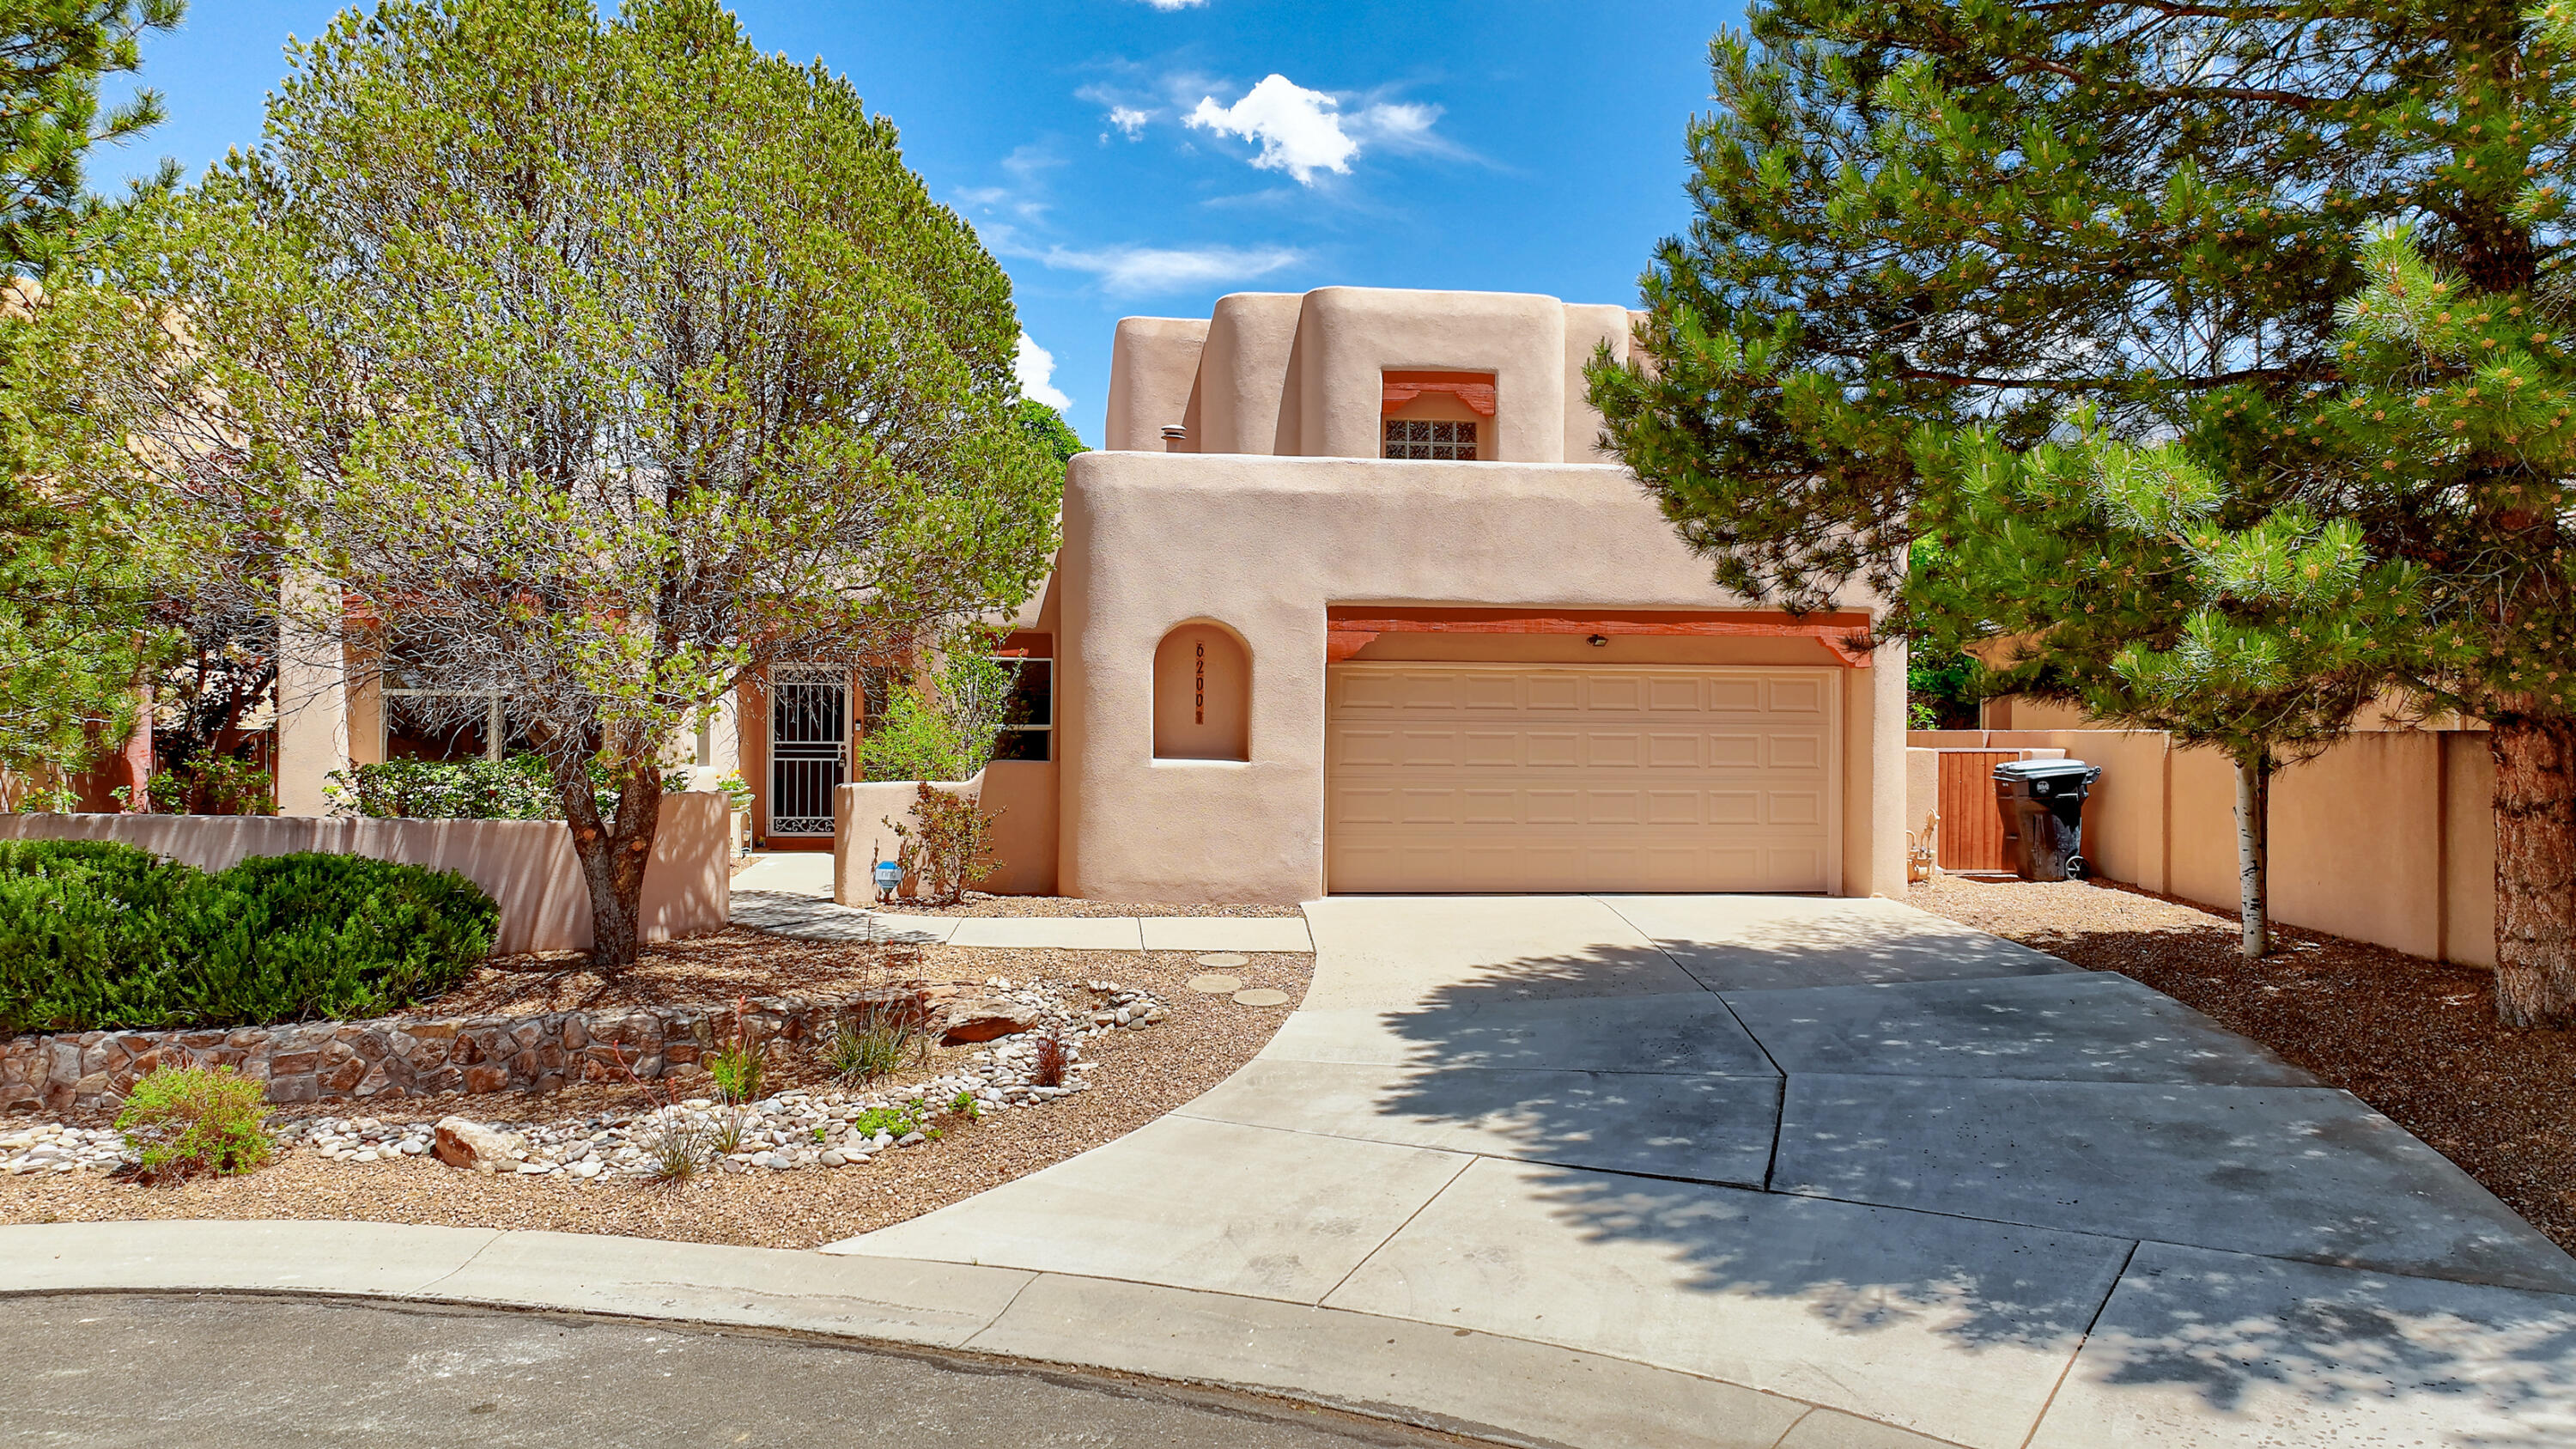 Welcome to this captivating, Santa Fe style custom home in High Desert on a private culdesac lot w/ views. Designer color scheme, beautiful finishes & a park like back yard.Updated chef's kitchen with breakfast bar, nook & SS appliances. Private Primary suite features hardwood floors, corner Kiva gaslog fireplace and covered deck with swing & some of the best mountain views in High Desert. Interior features no carpet, custom ceramic tile, porcelain travertine & tumbled marble finishes, dramatic living /dining room raised wood beam T & G ceiling w/ east wall of windows for light & more views. Potential fourth bedroom/Den/Media room, currently being used as an office.Enjoy Tranquil outdoor living from the front courtyard filled w/ roses, the private backyard w/ covered & open patio areas